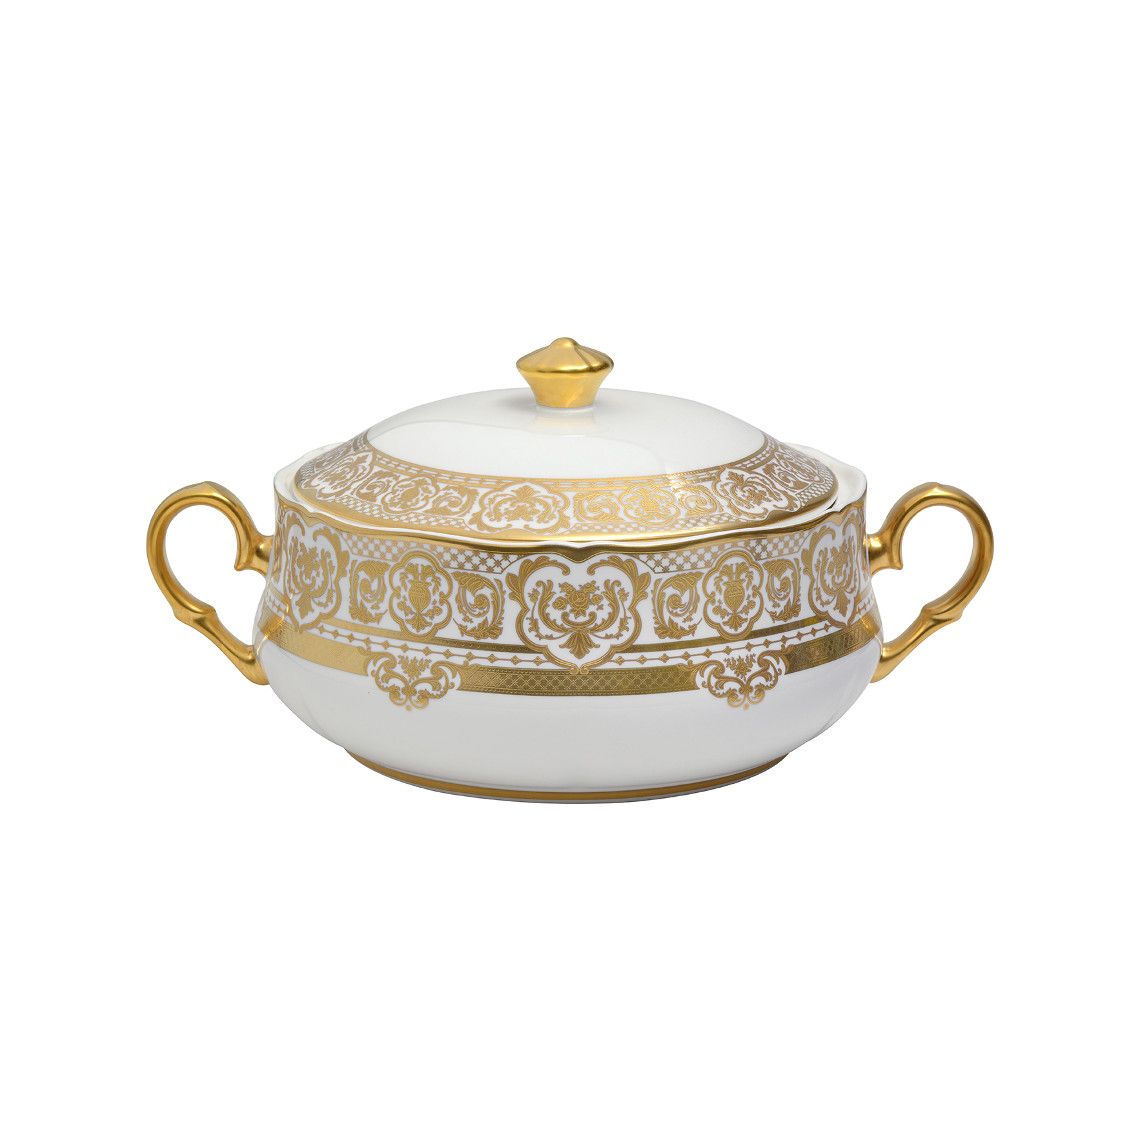 Prouna Carlsbad Queen White Covered Vegetable Bowl / Soup Tureen White Background Photo